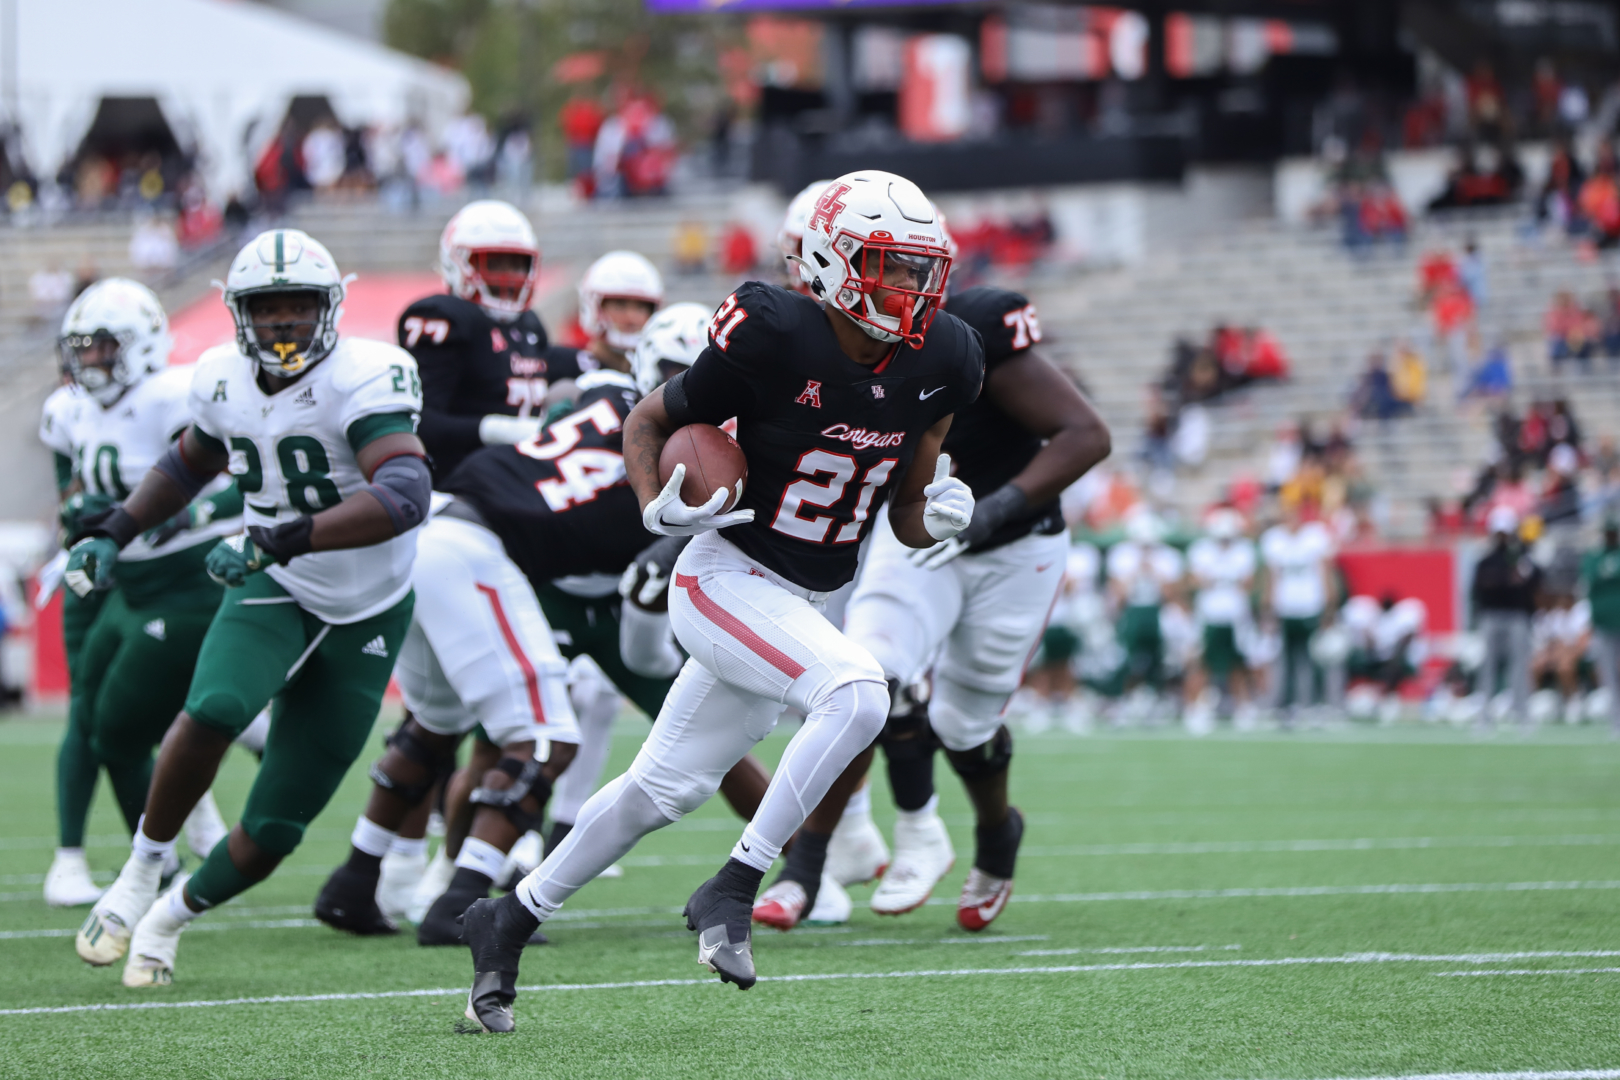 Redshirt freshman Stacy Sneed has emerged as the lead running back for UH football over the past month. | Sean Thomas/The Cougar